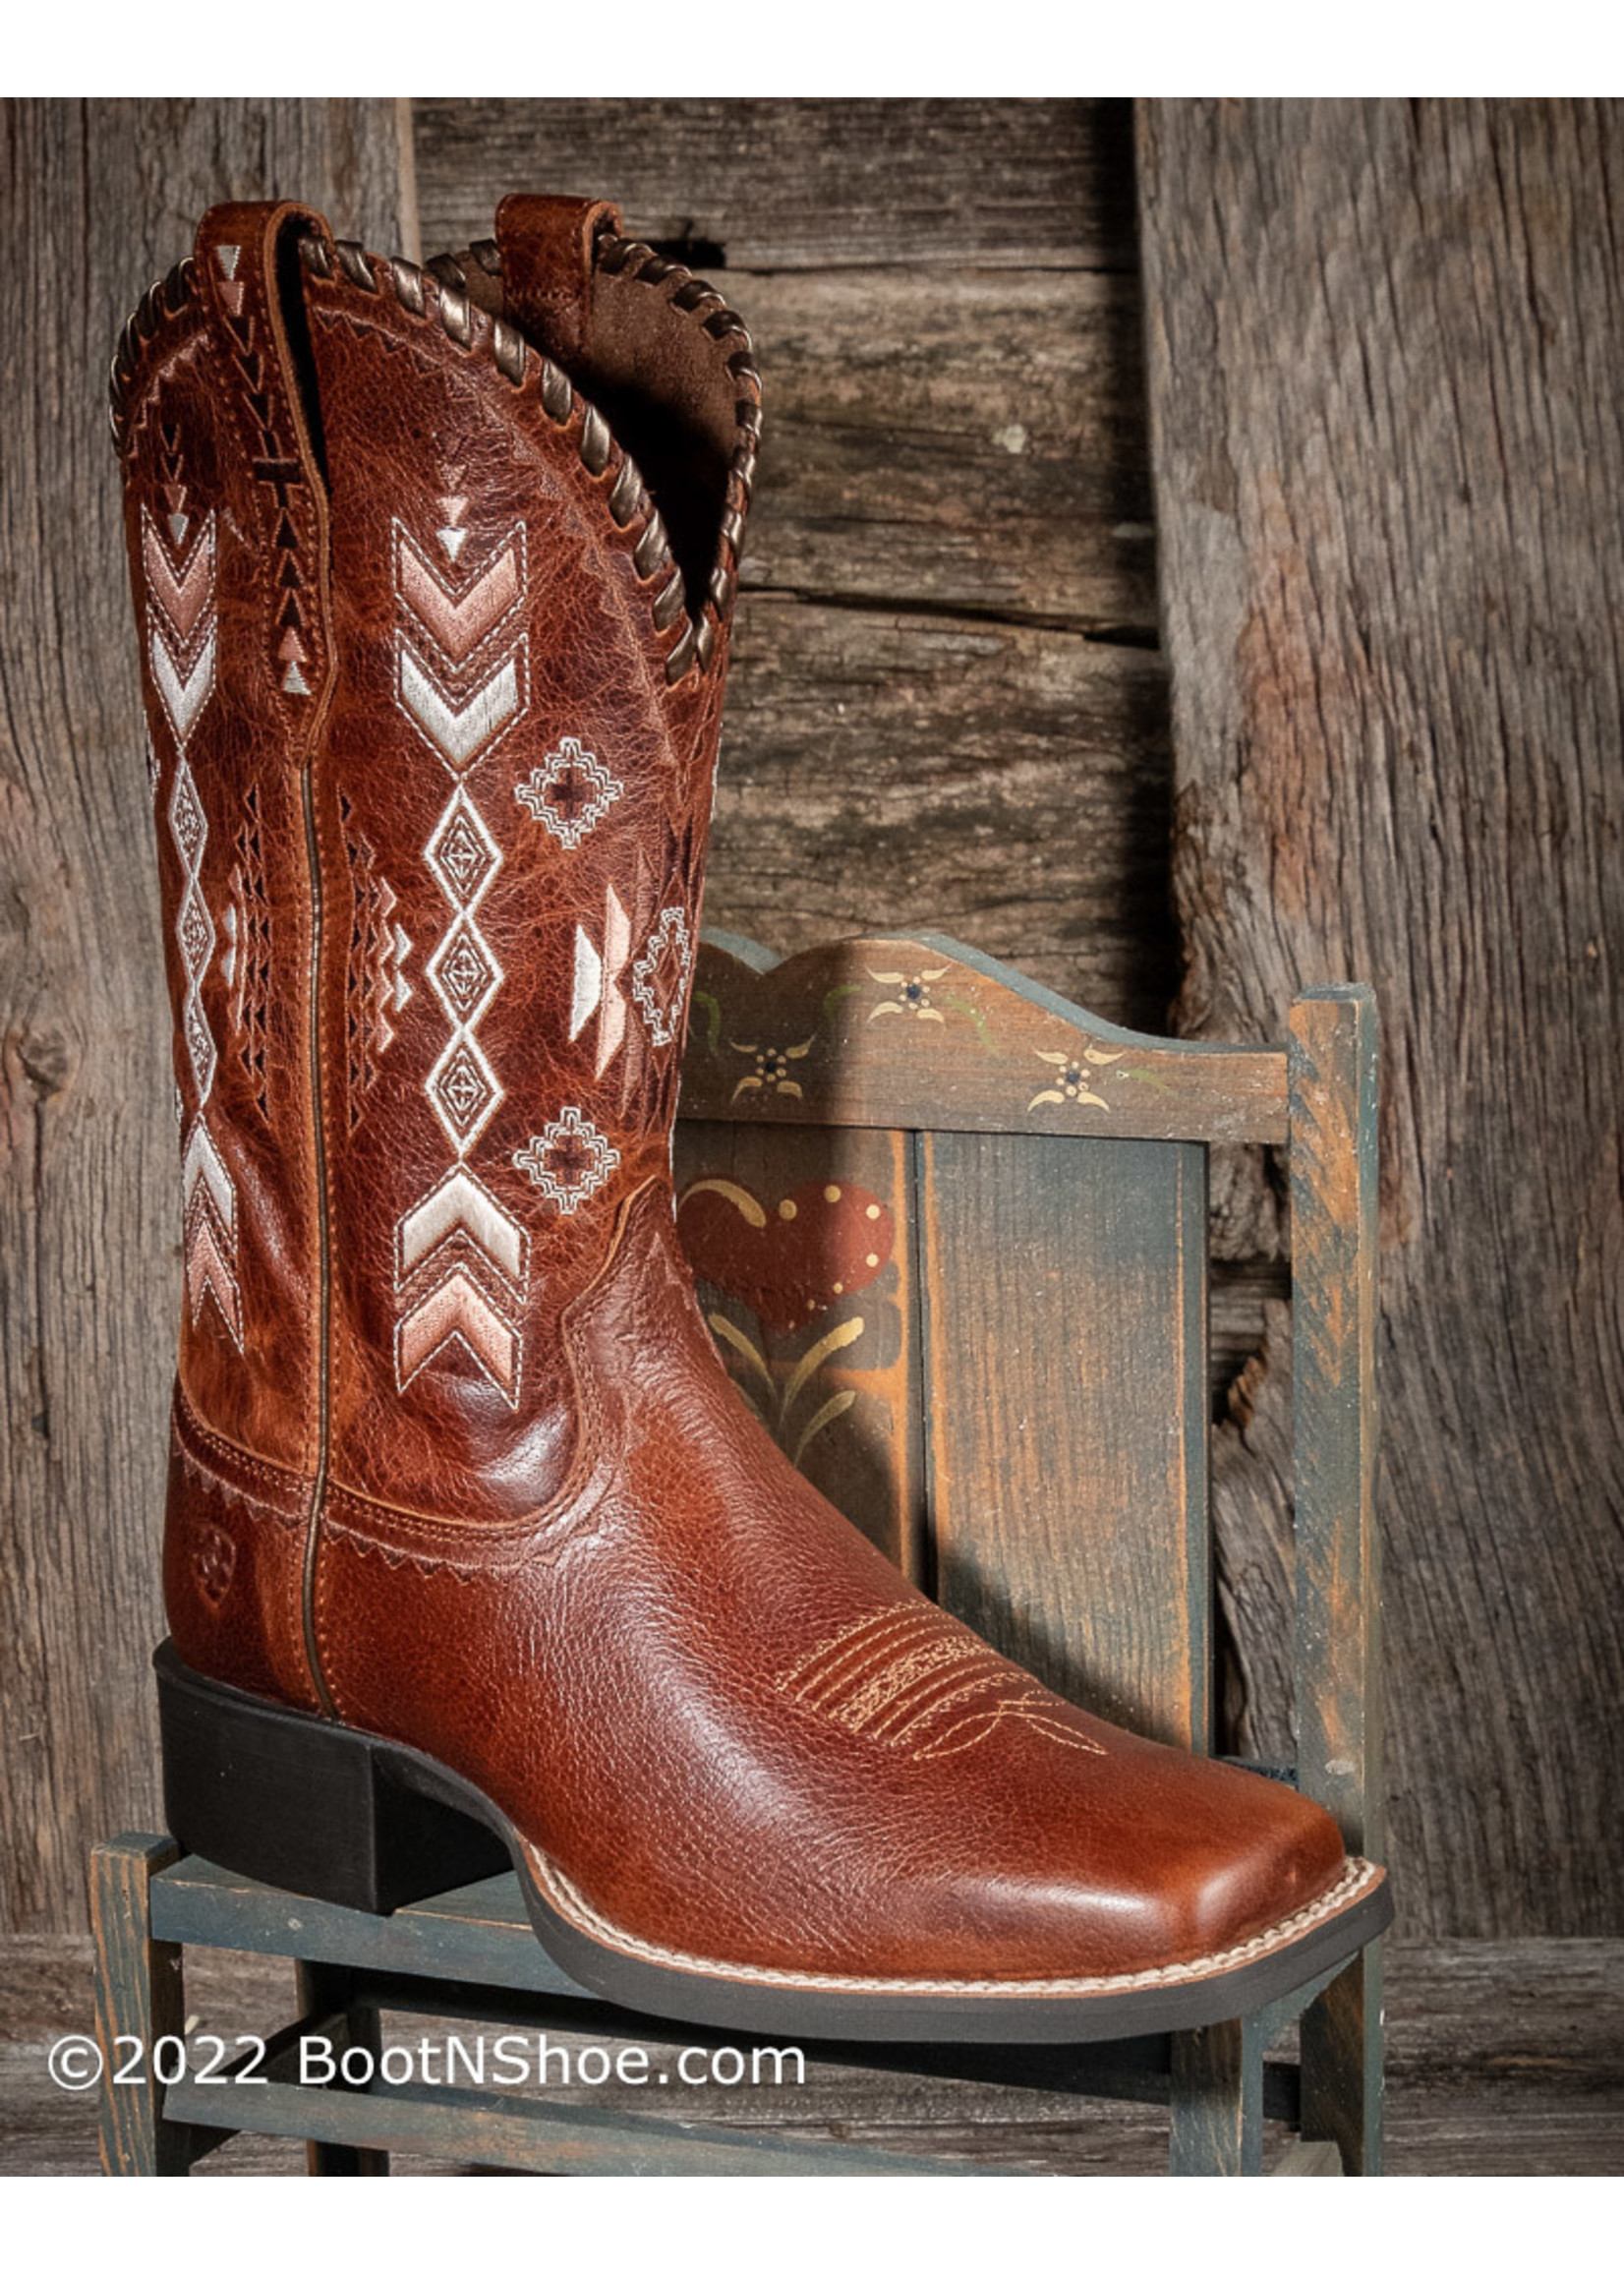 Ariat Women's Round Up Skyler Canyon Tan  w/ embroidery Western Boot 10038327